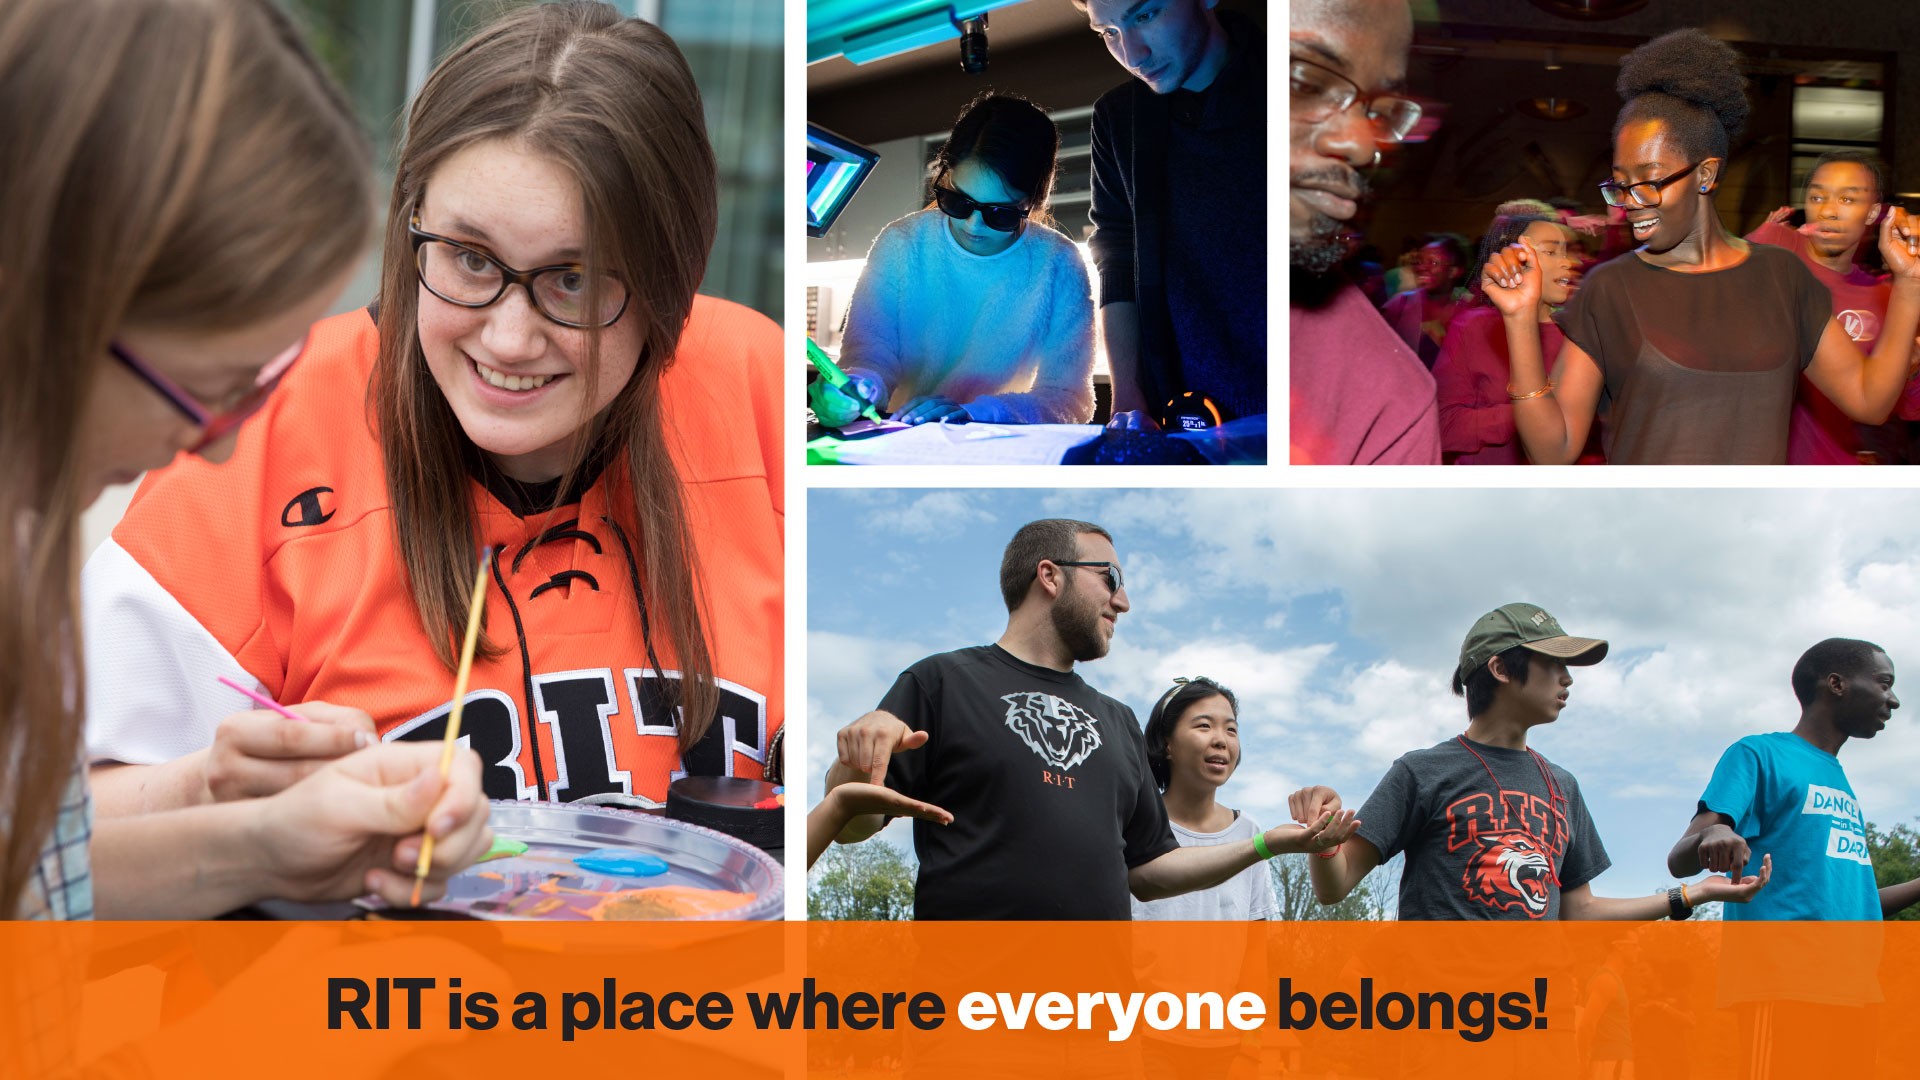 RIT is a place where everyone belongs!